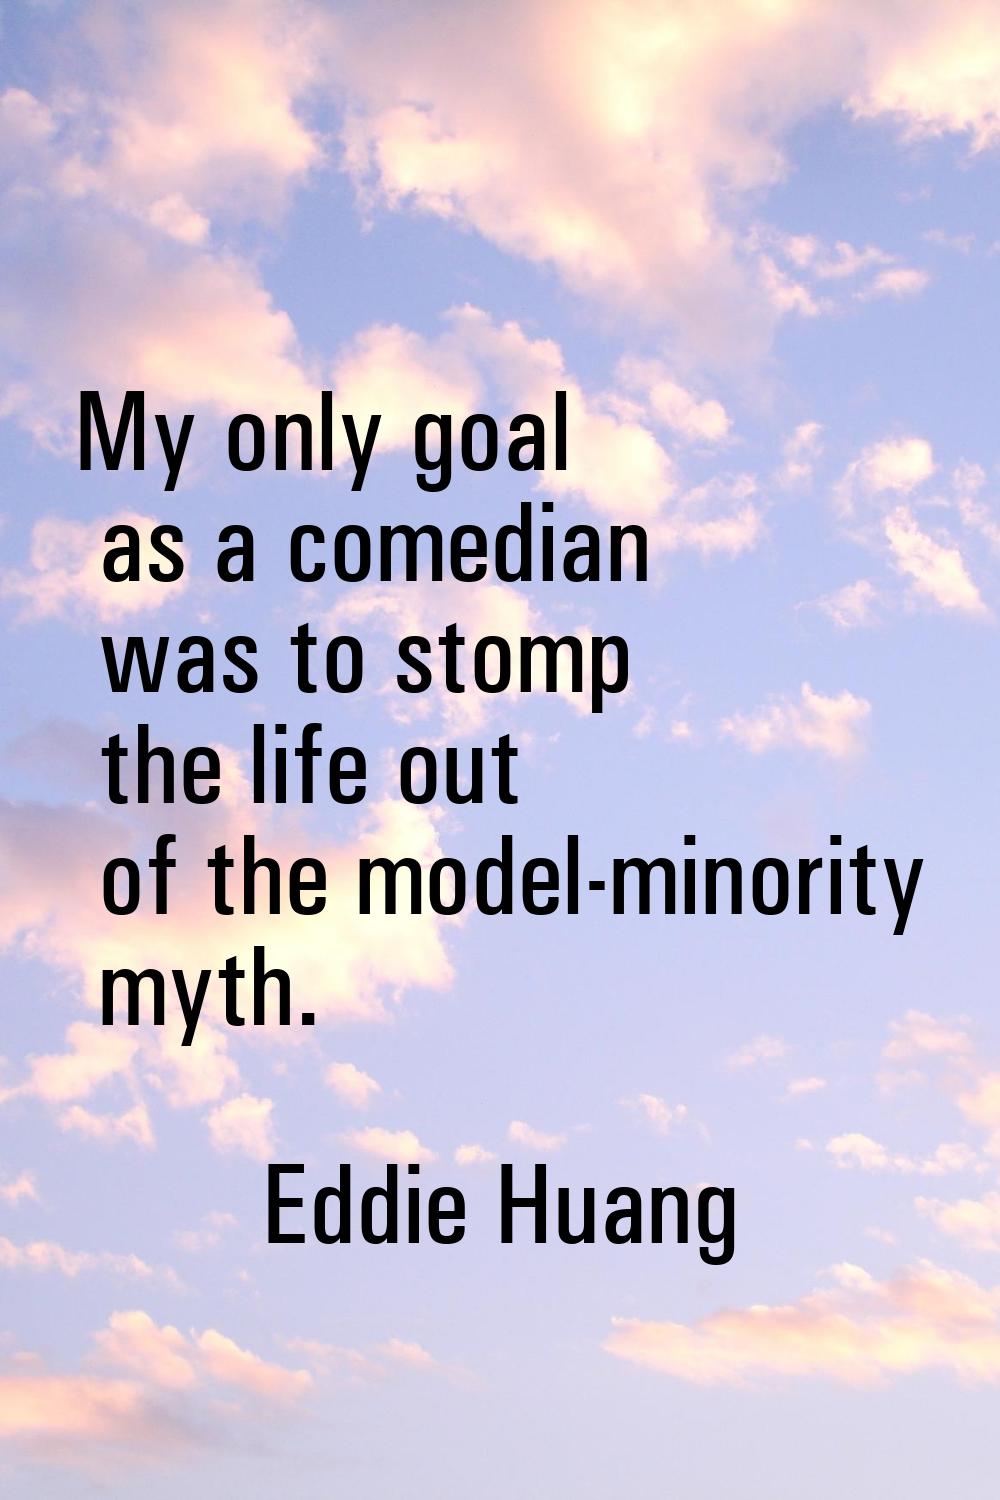 My only goal as a comedian was to stomp the life out of the model-minority myth.